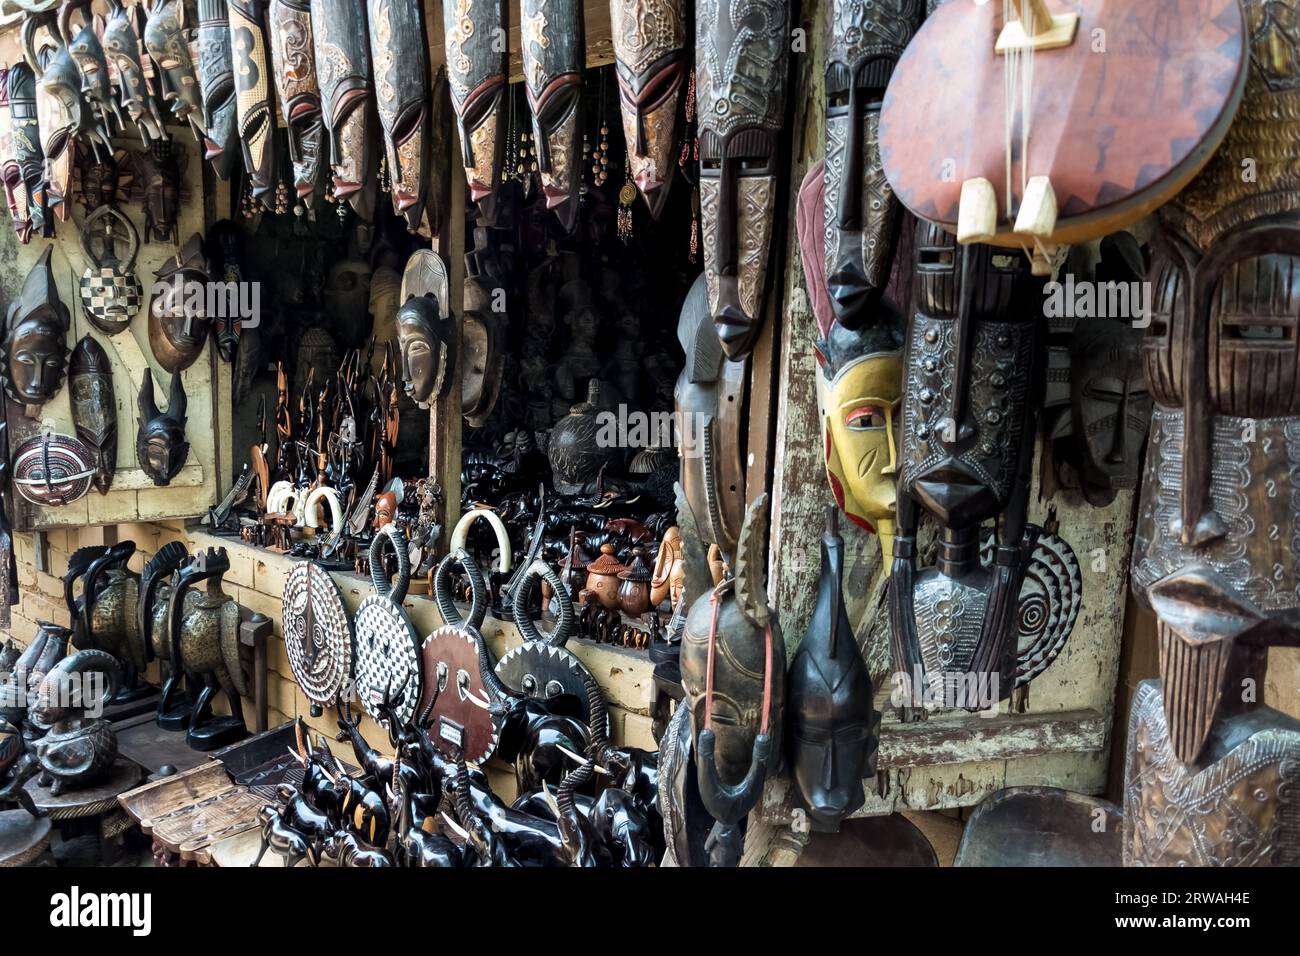 Ivory Coast Masks and Handcraft: Symbolic artistry in deities, spirits, and animals reflecting the depth of Ivorian traditions Stock Photo